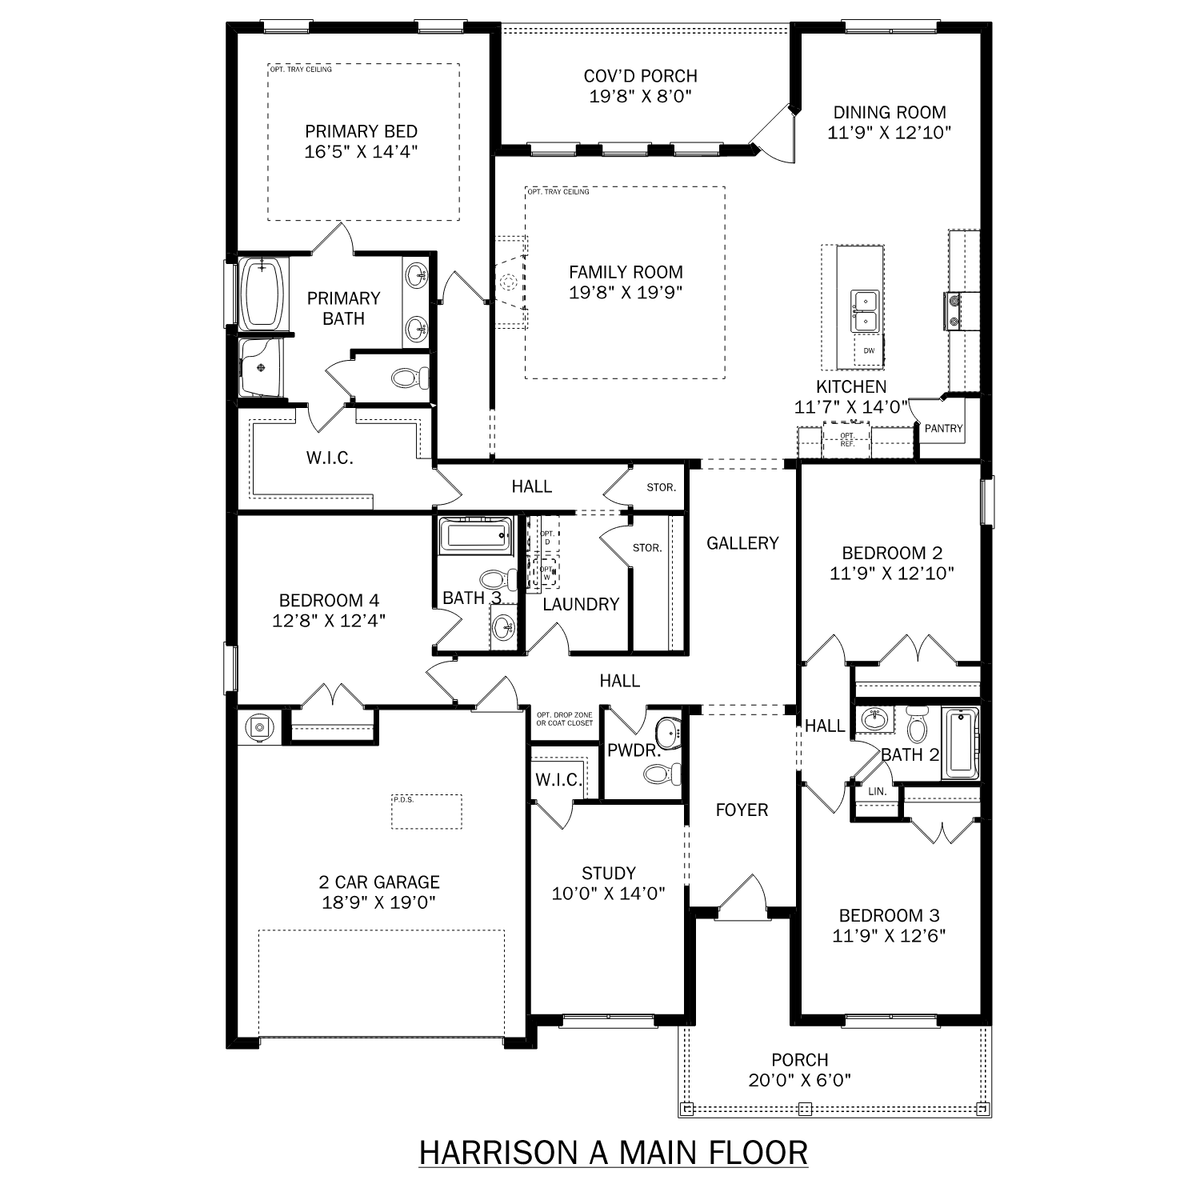 1 - The Harrison floor plan layout for 233 White Horse Way in Davidson Homes' Kendall Downs community.